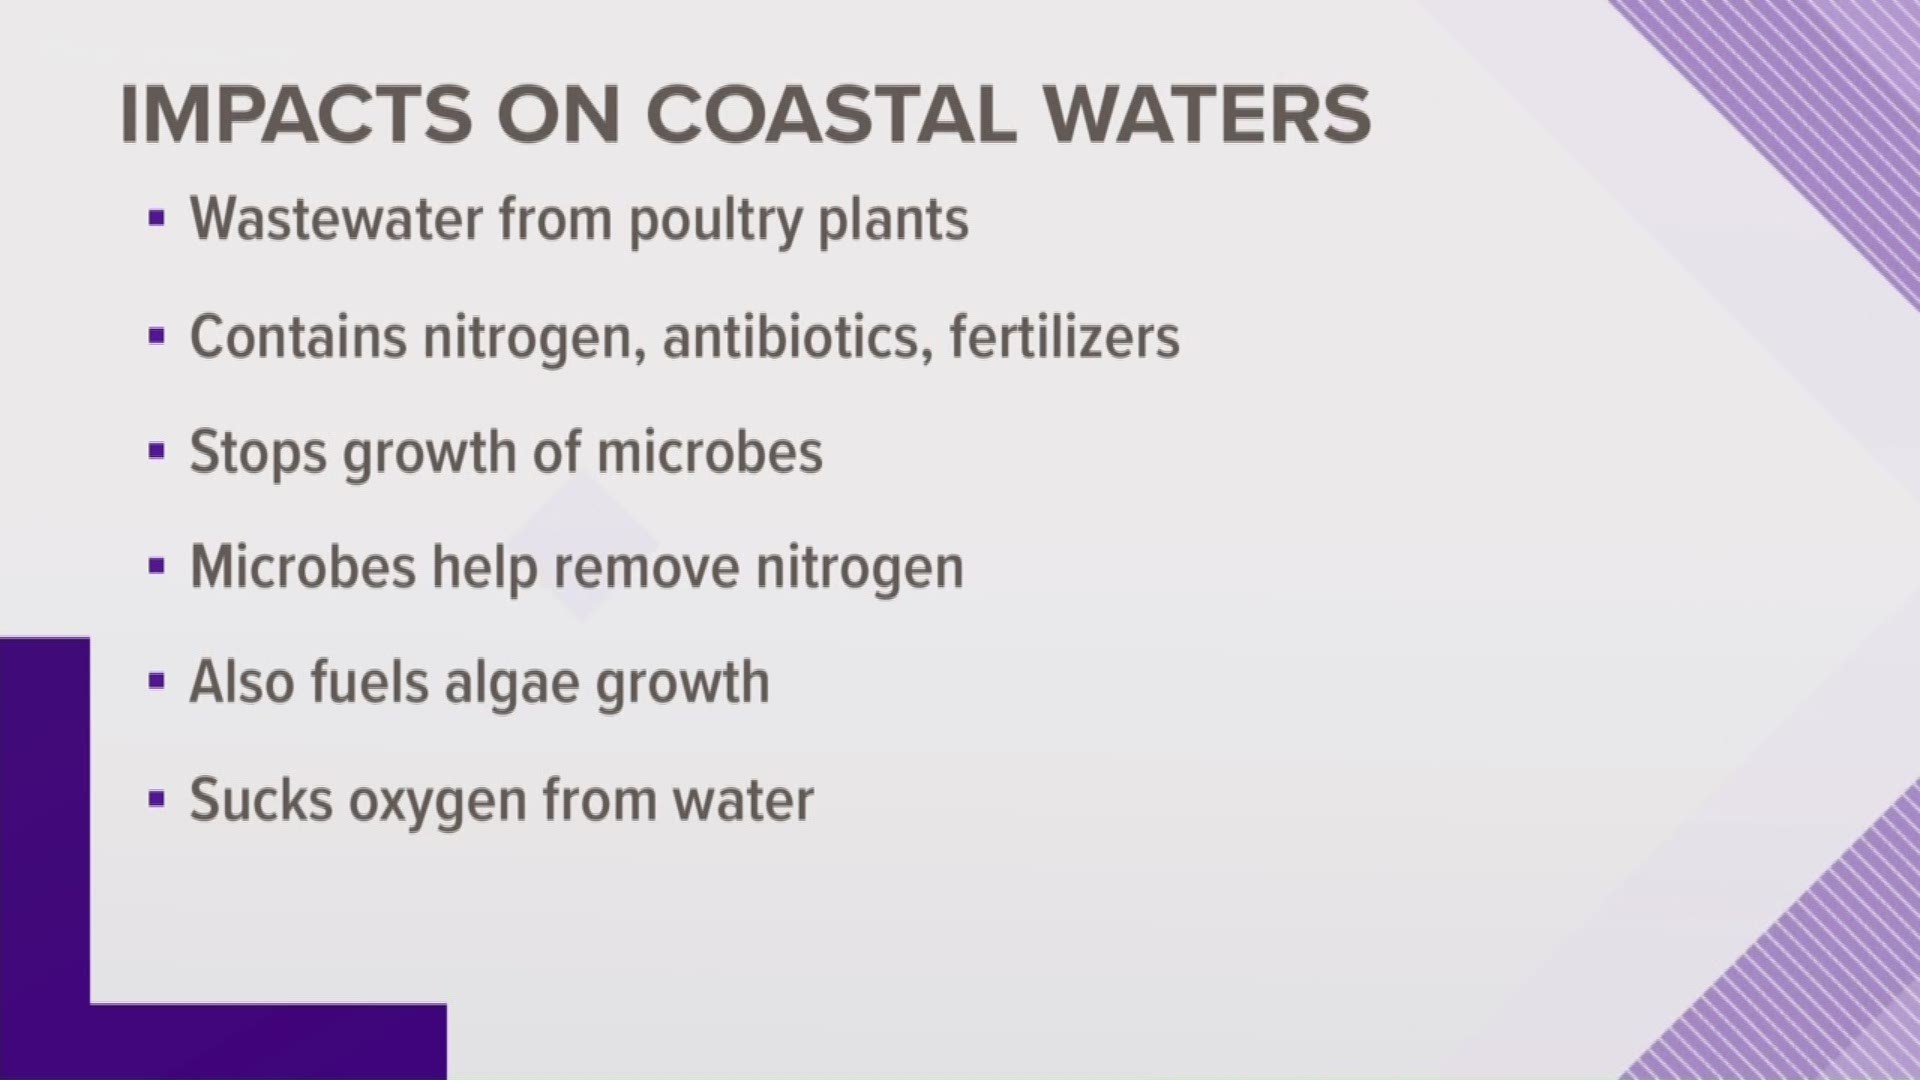 A new study from William & mary claims poultry plants are a "threat to coastal waters." It comes from the wastewater.